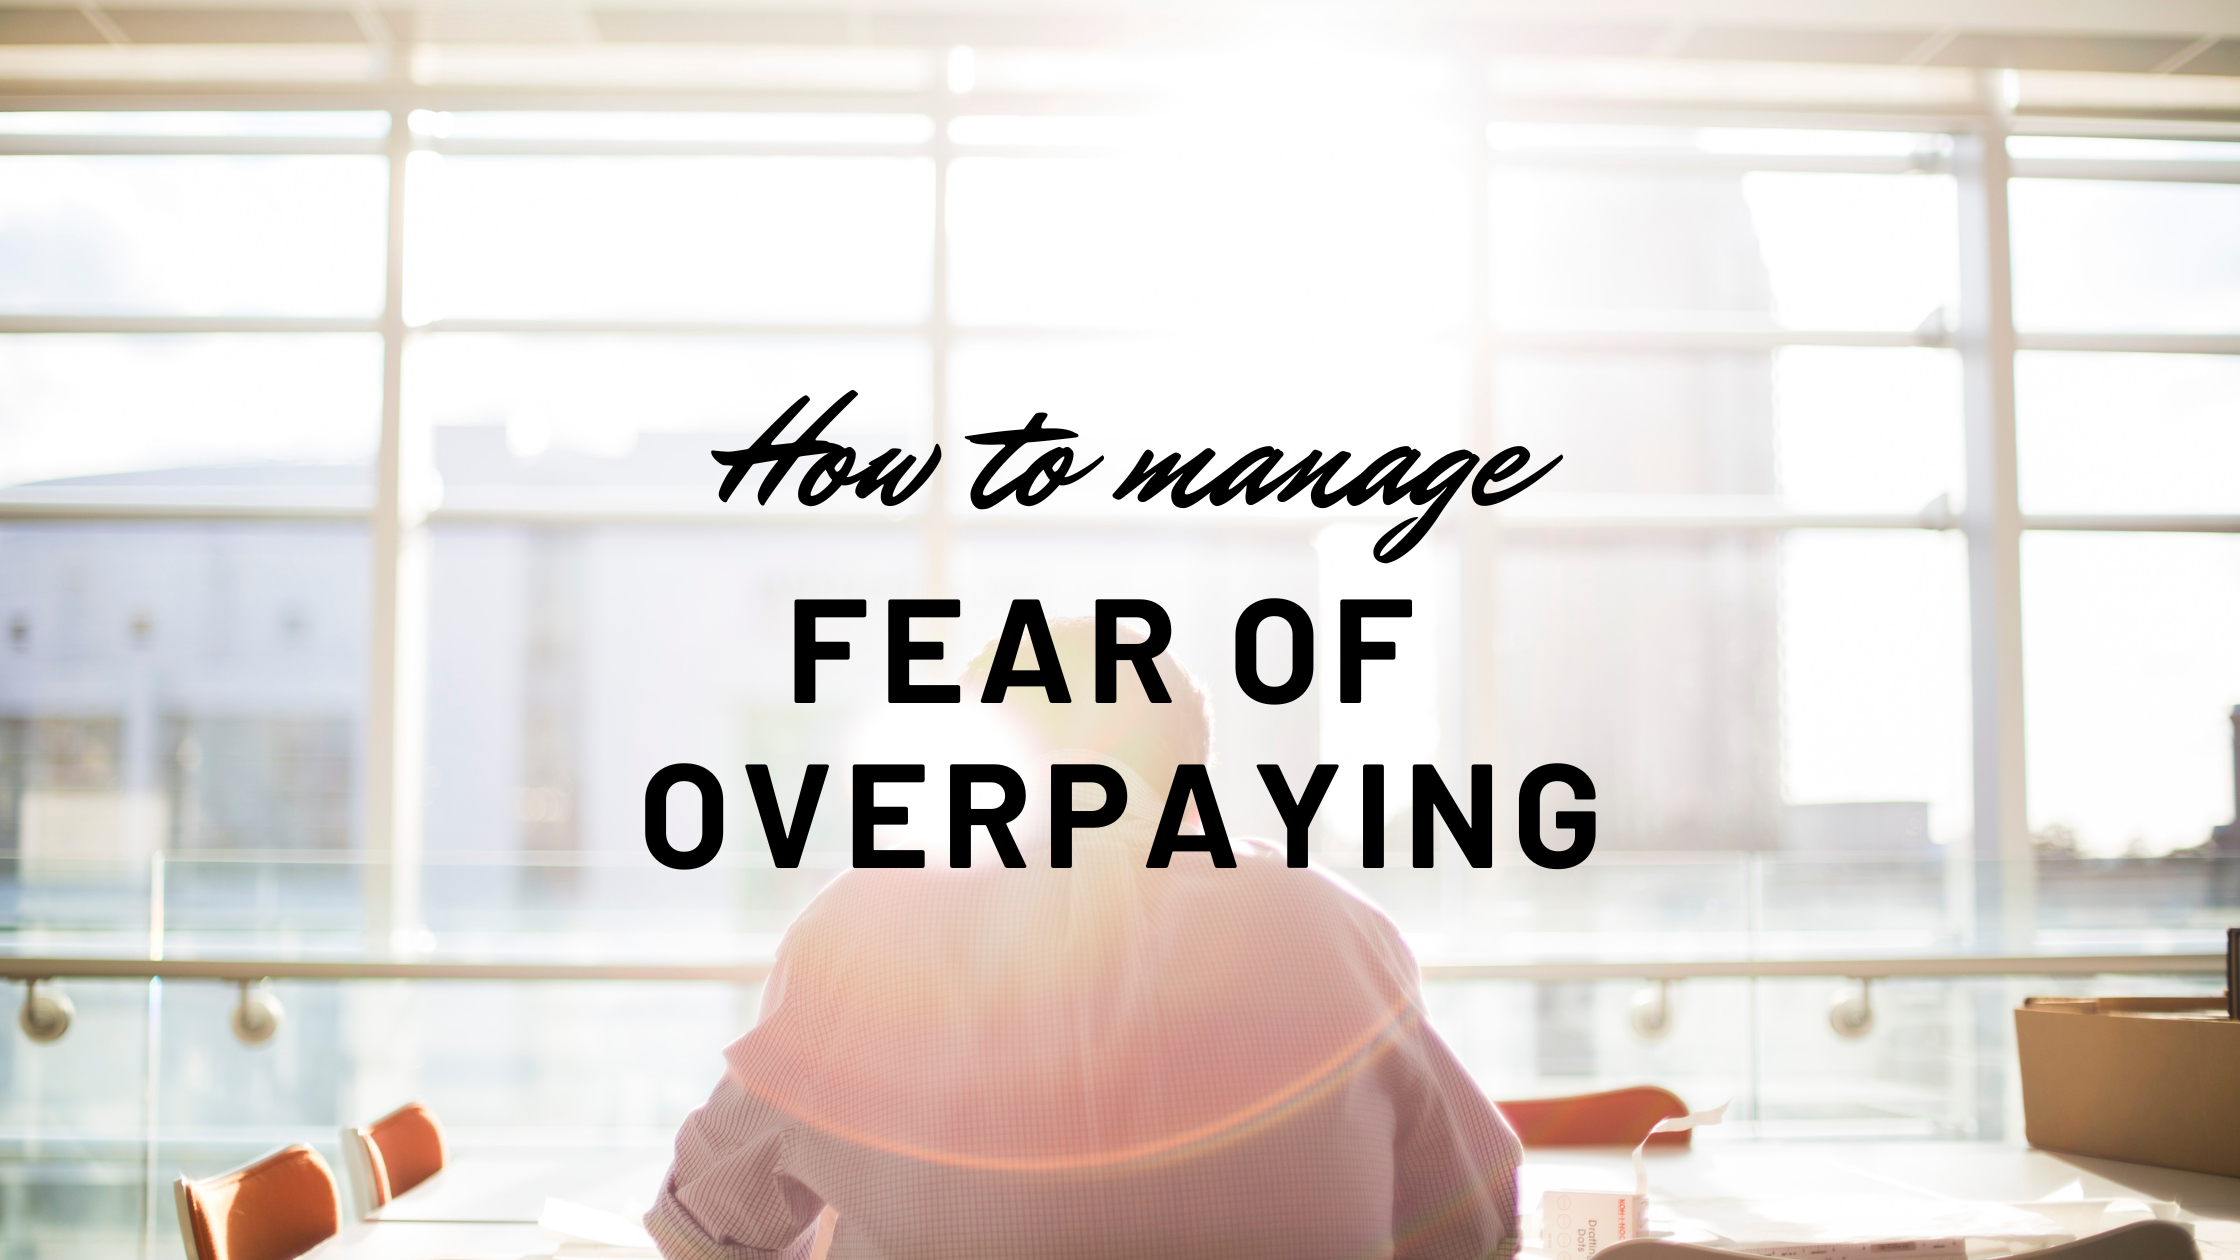 Feature Article - How to manage fear of overpaying when buying a home